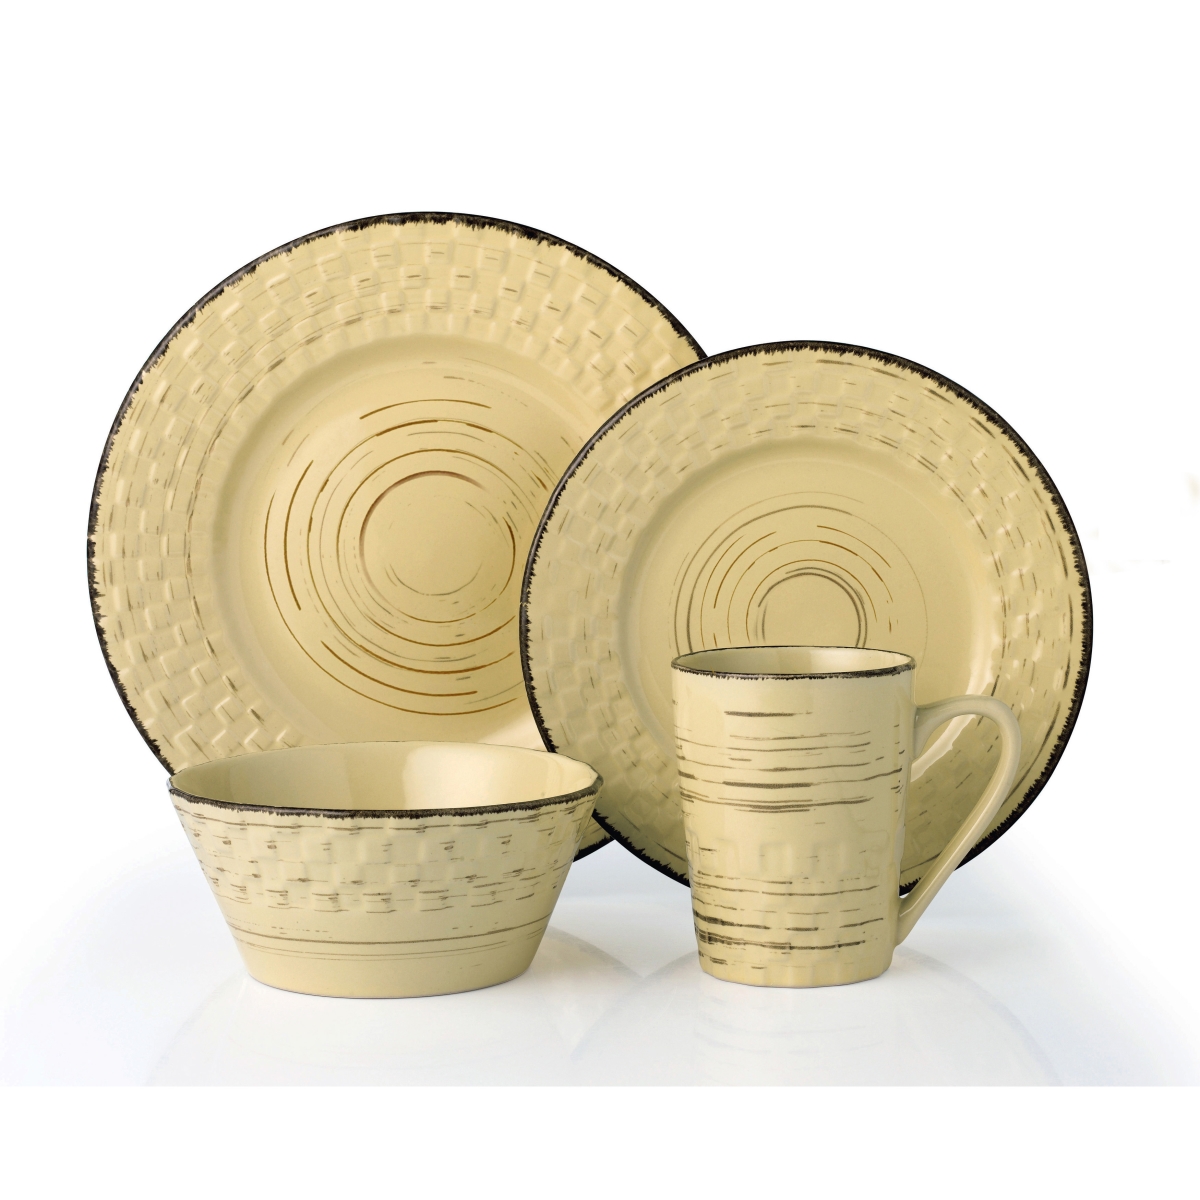 Picture of Lorren Home Trends LH518 16 Piece Distressed Weave Dinnerware Set, Buttercup